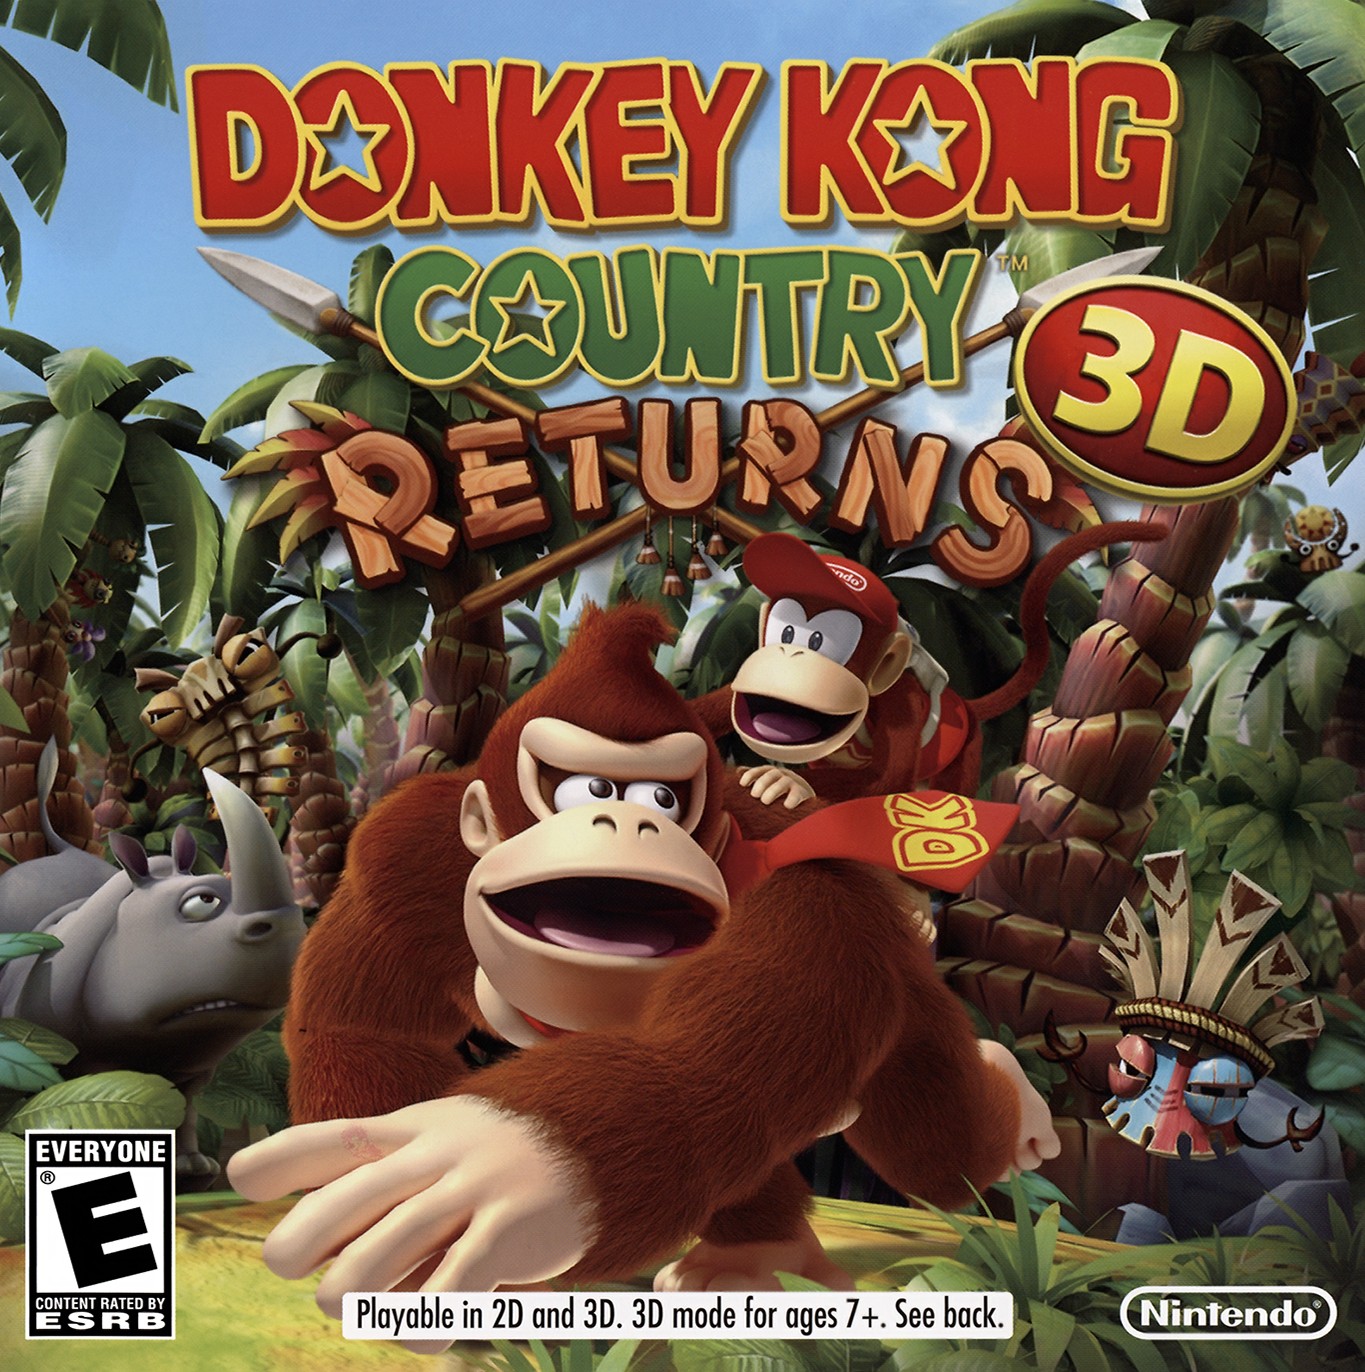 'Donkey Kong Country: Returns 3D'